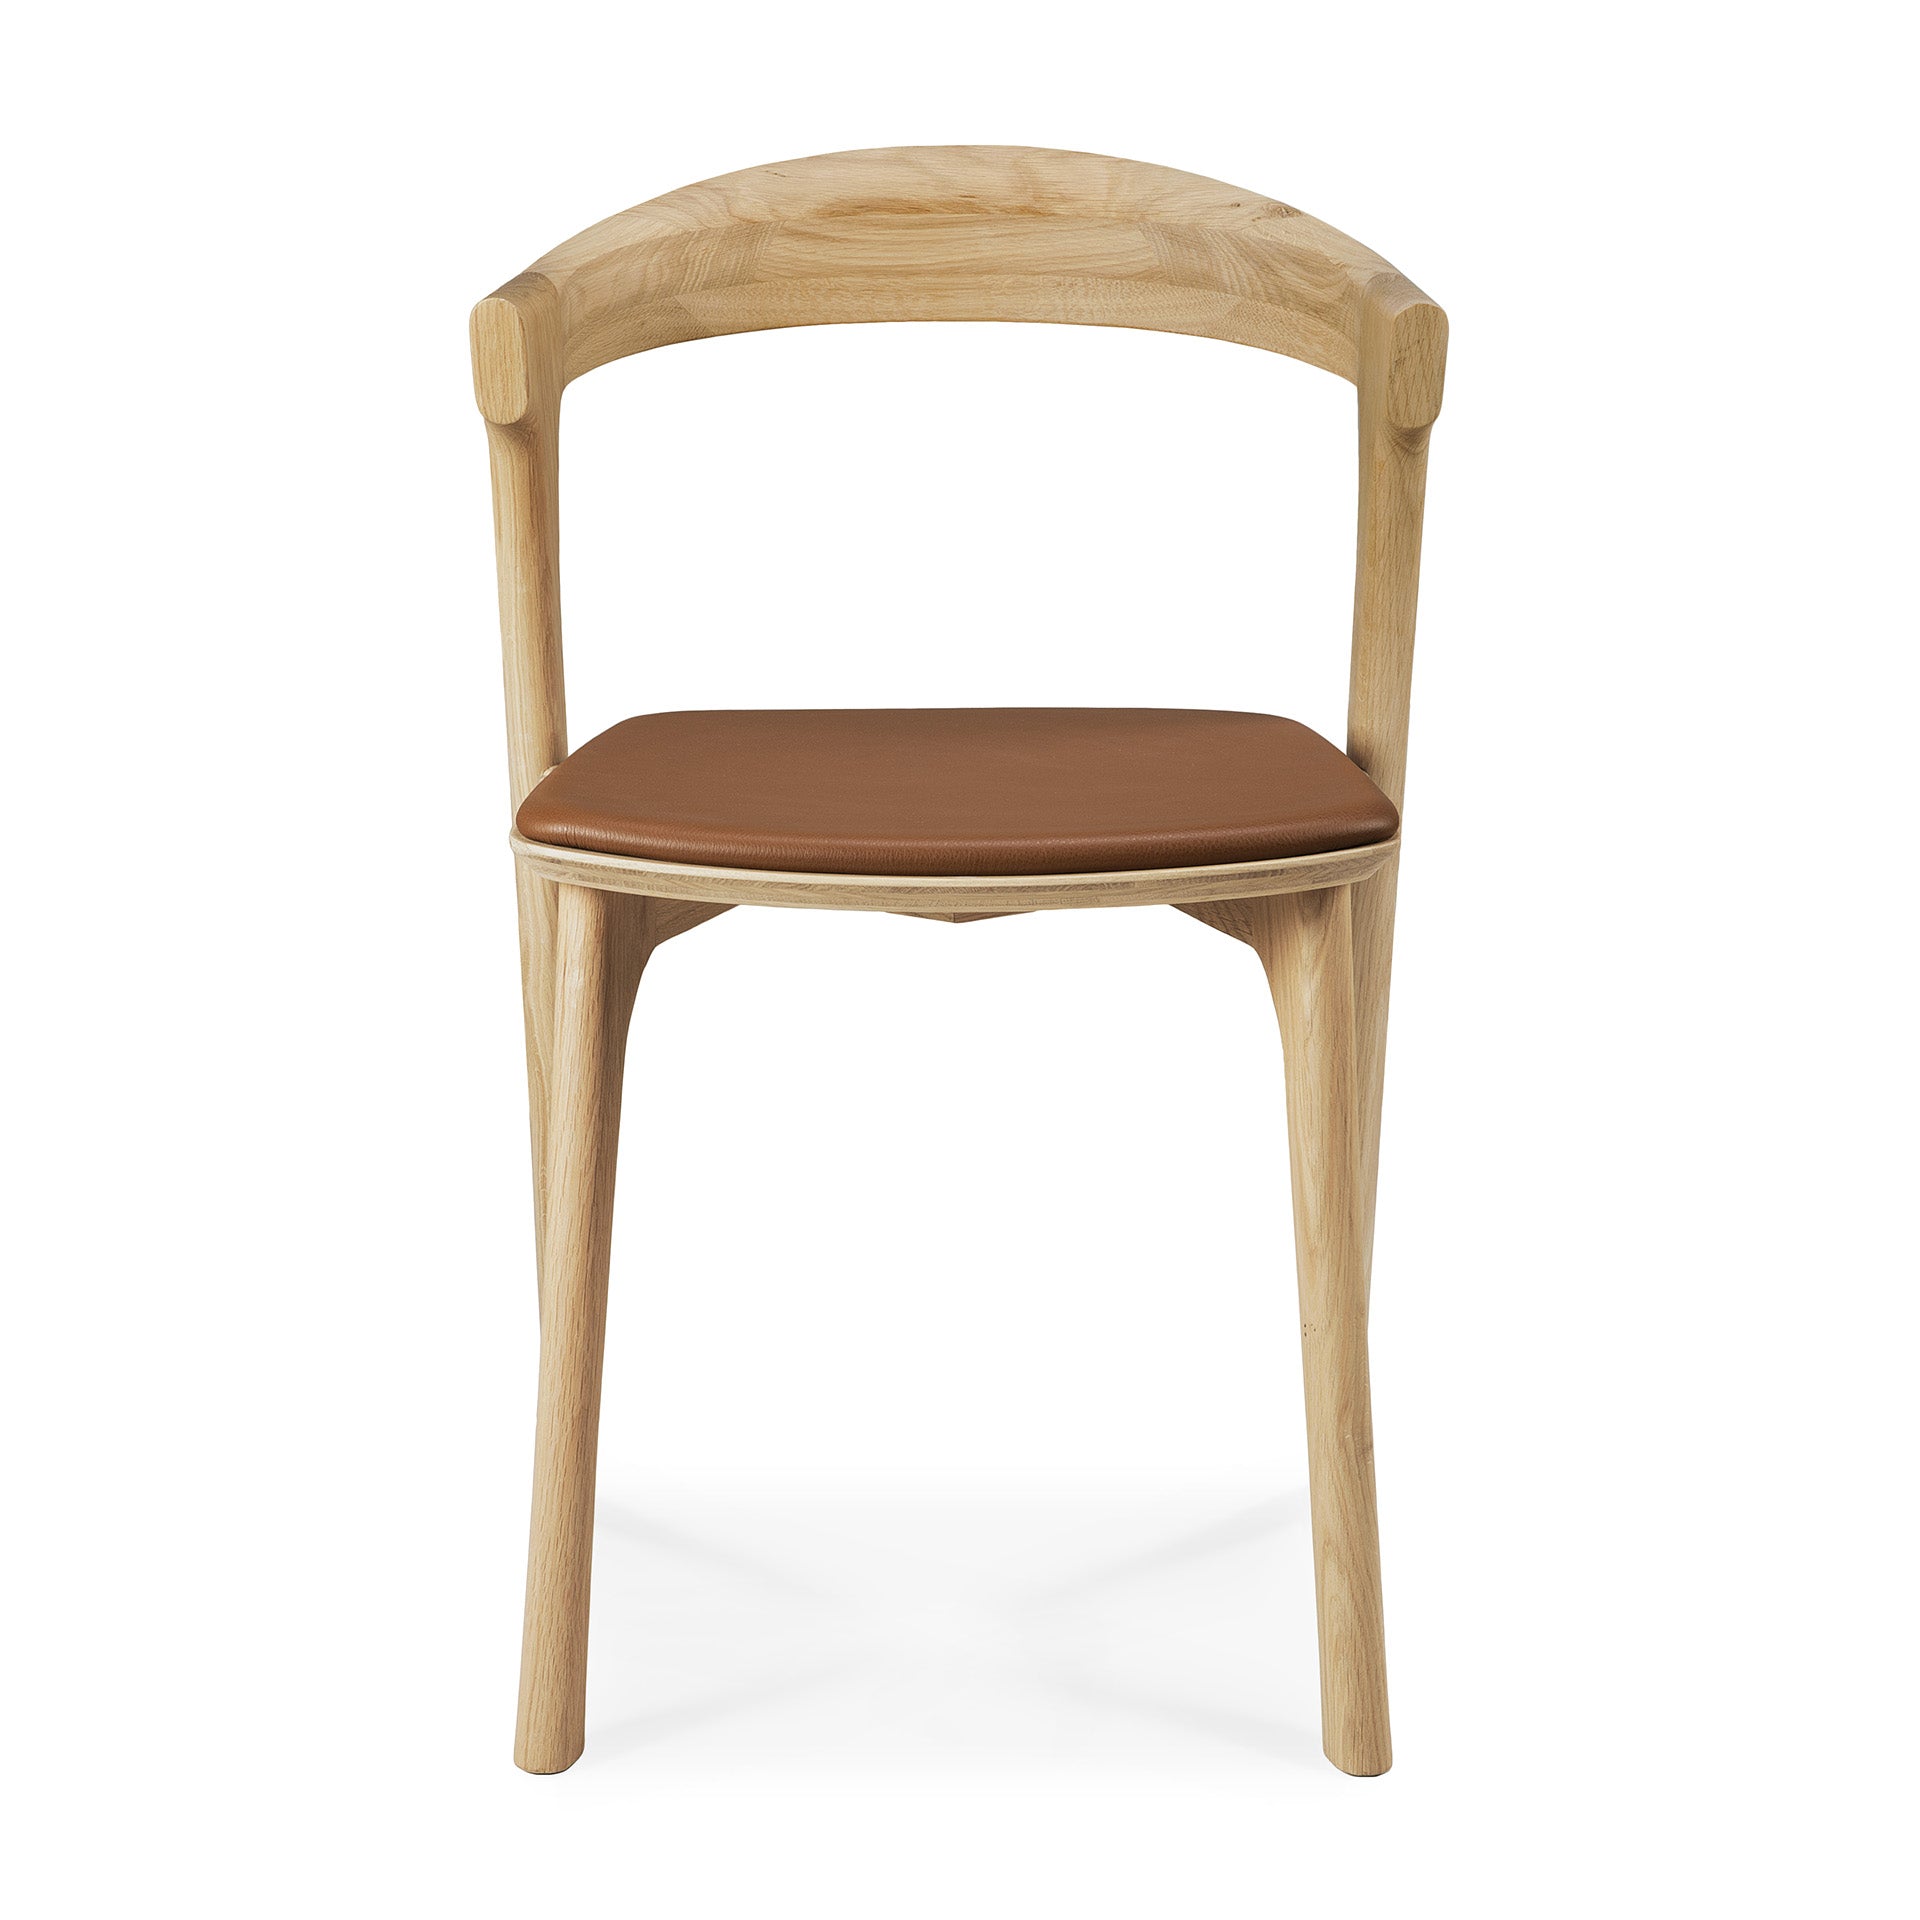 Bok Solid Oak Dining Chair, Varnished with Cognac Leather Cushion